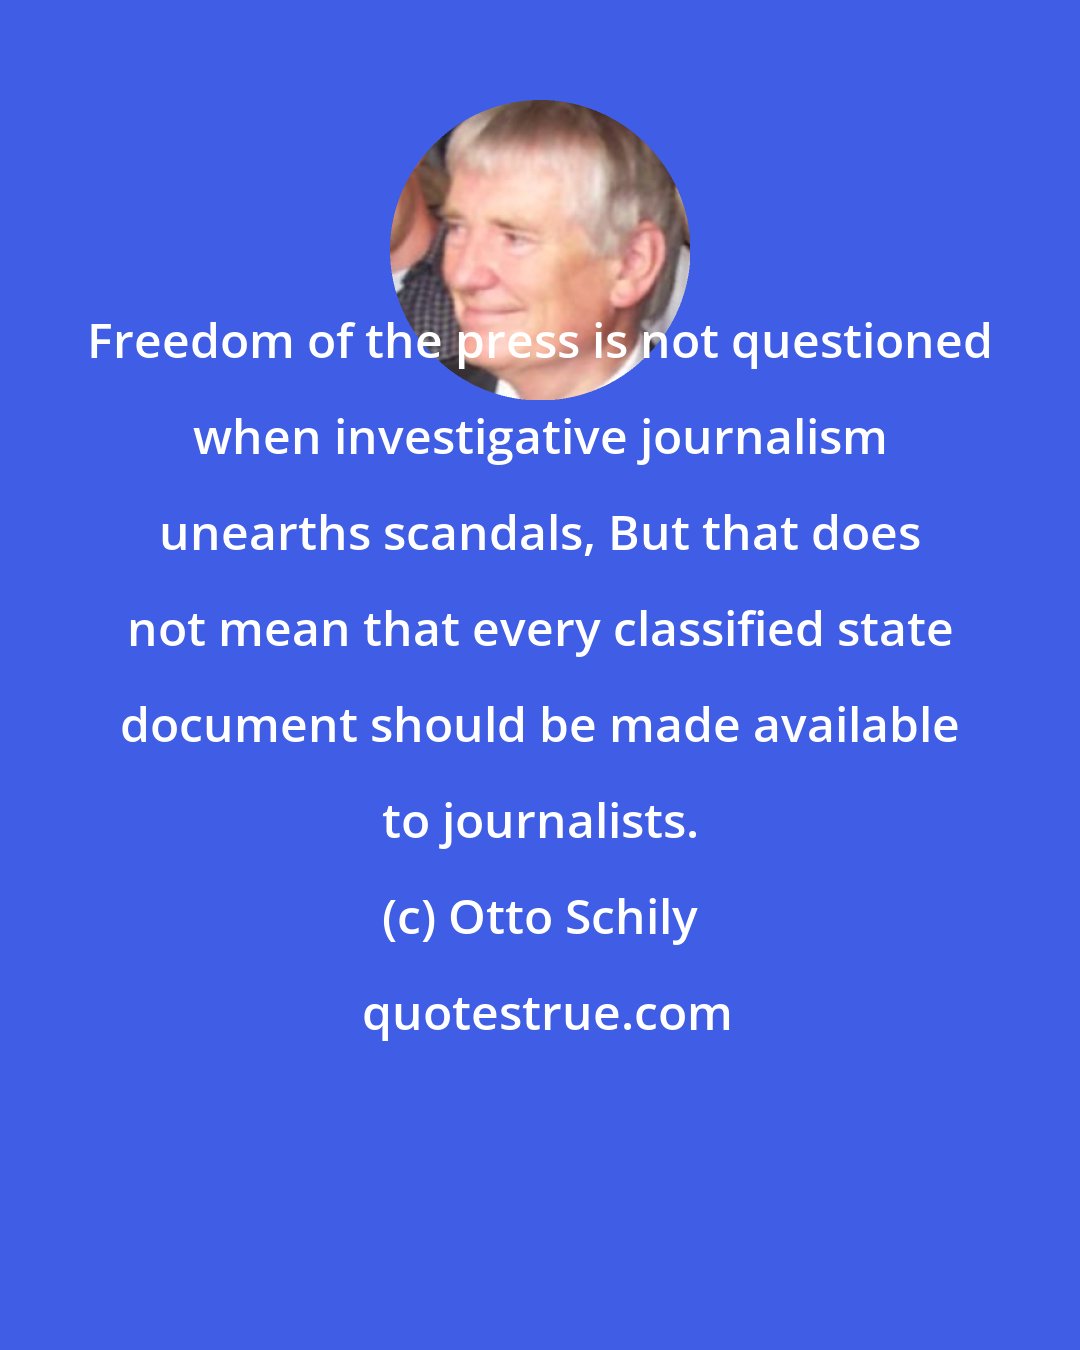 Otto Schily: Freedom of the press is not questioned when investigative journalism unearths scandals, But that does not mean that every classified state document should be made available to journalists.